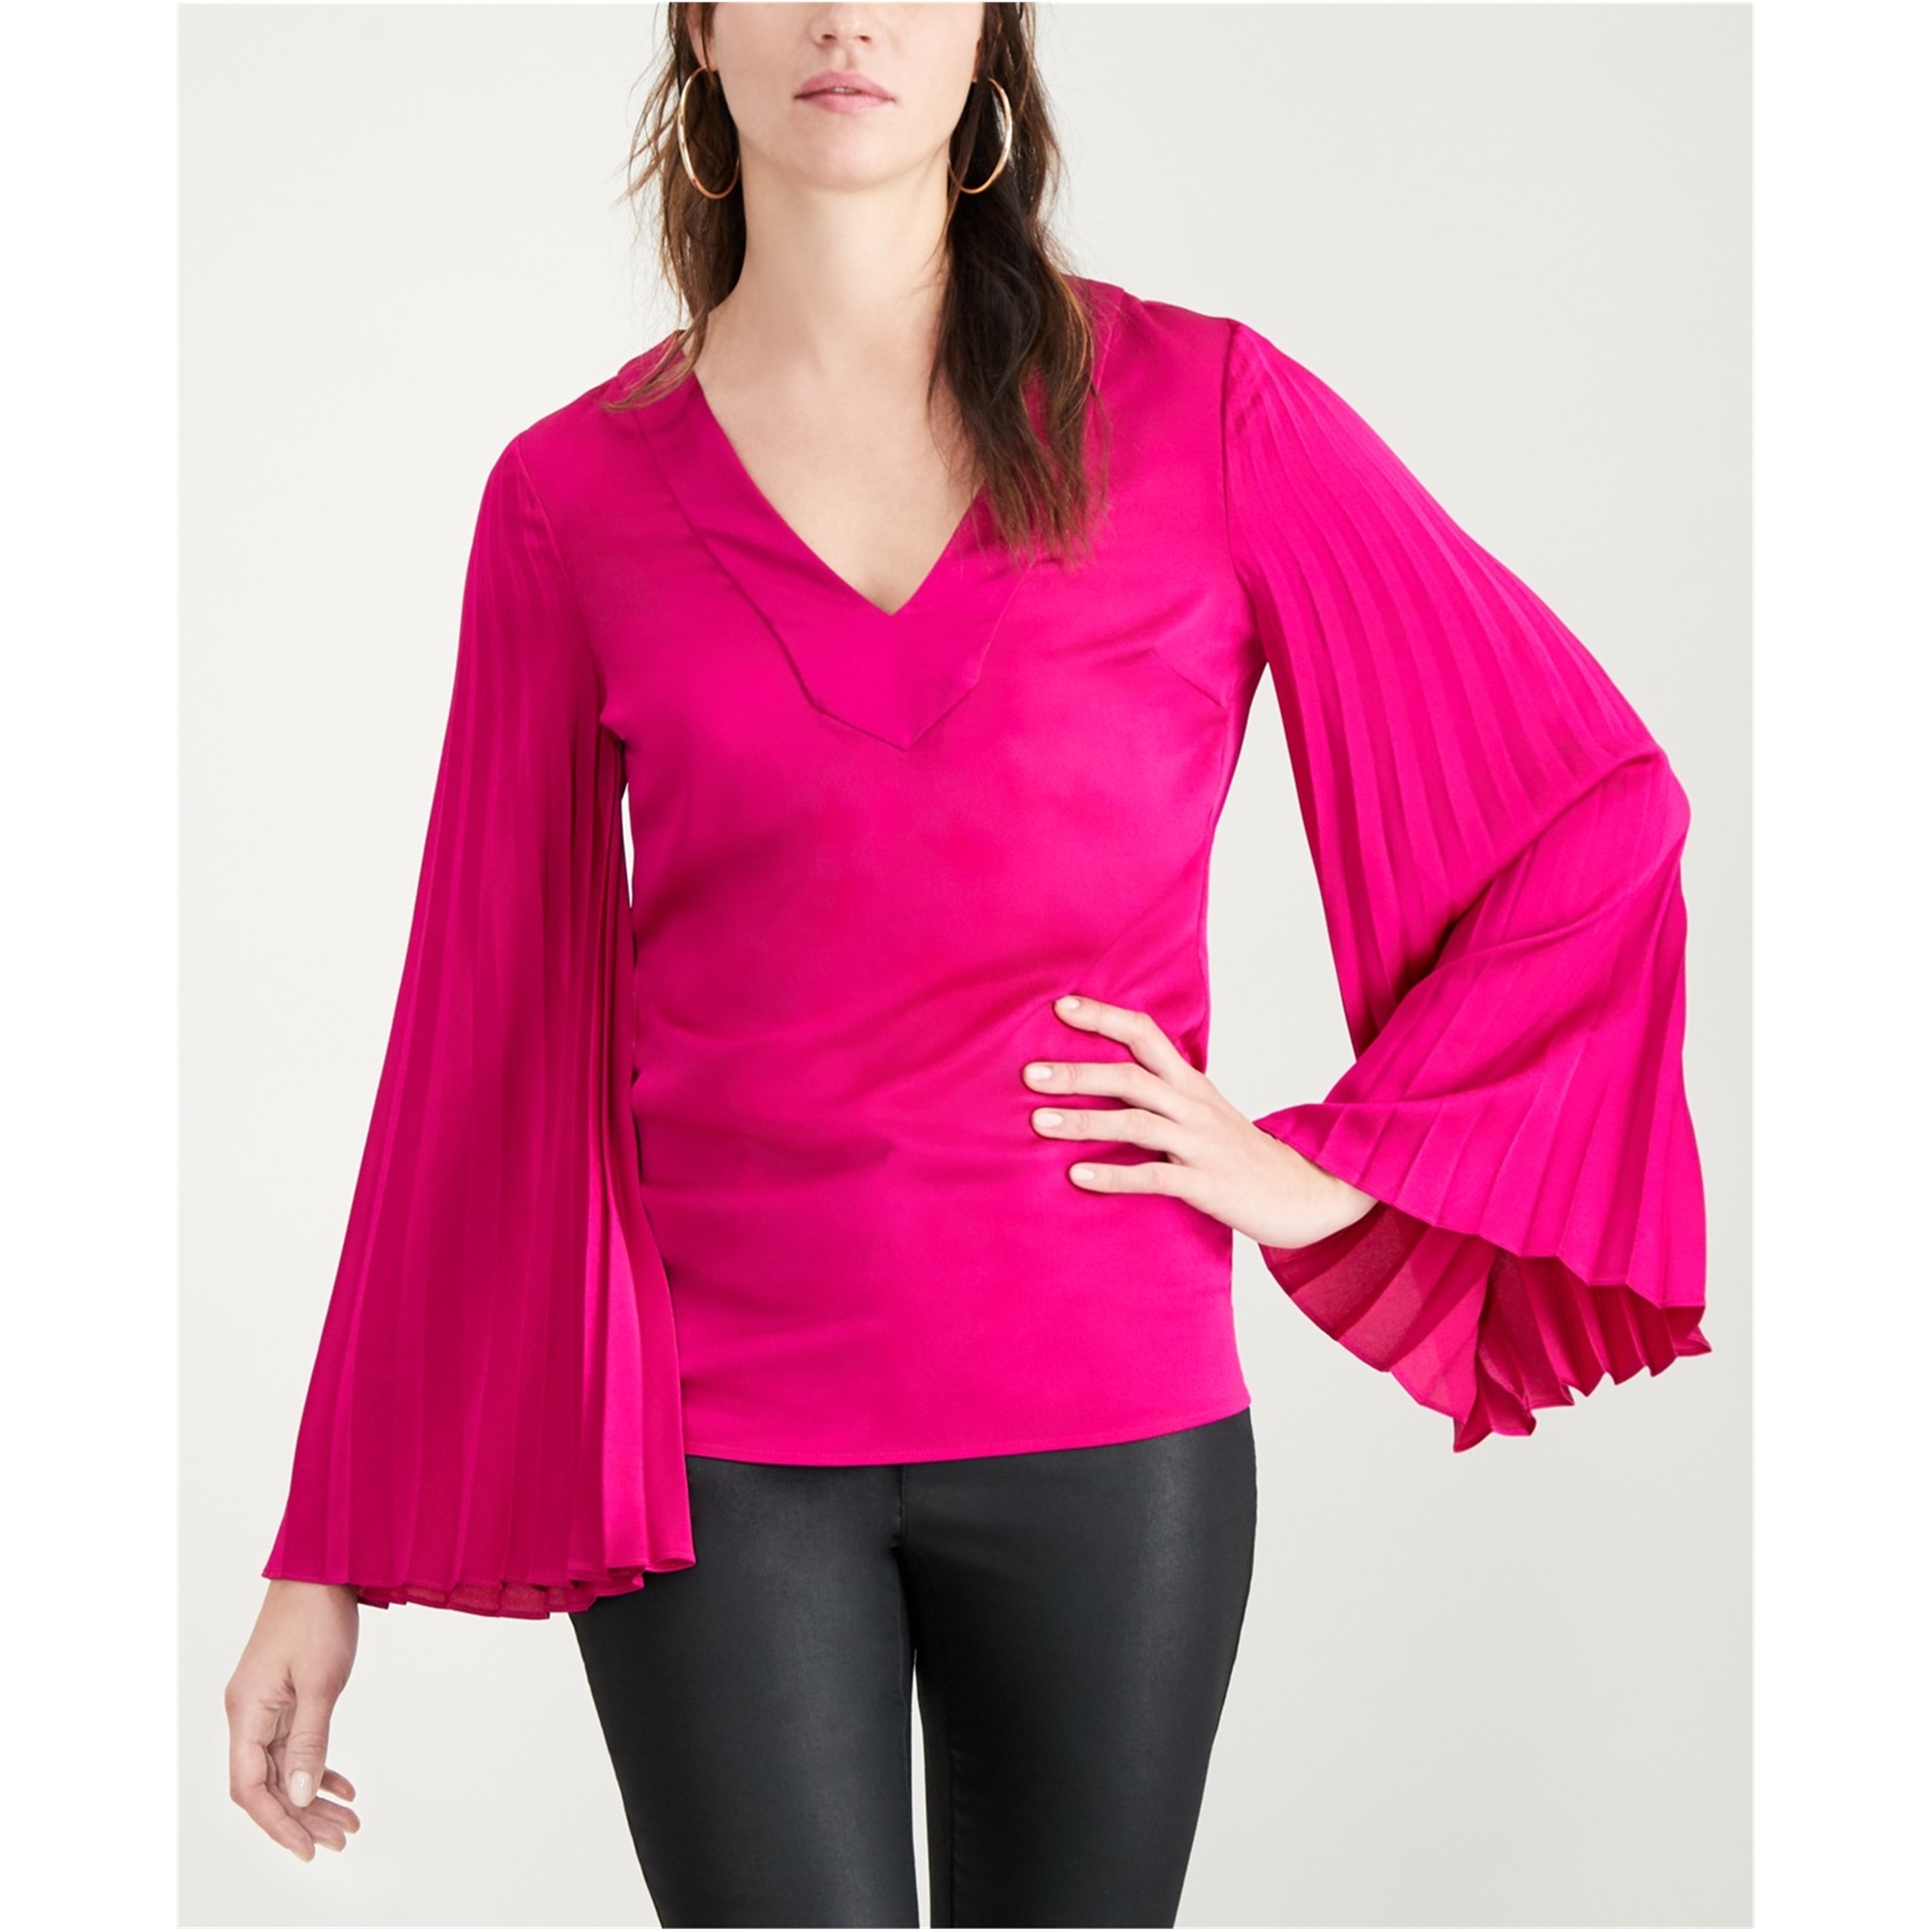 Trina Turk Womens Almande Pleated Sleeve Pullover Blouse, Pink, X-Small - image 1 of 1